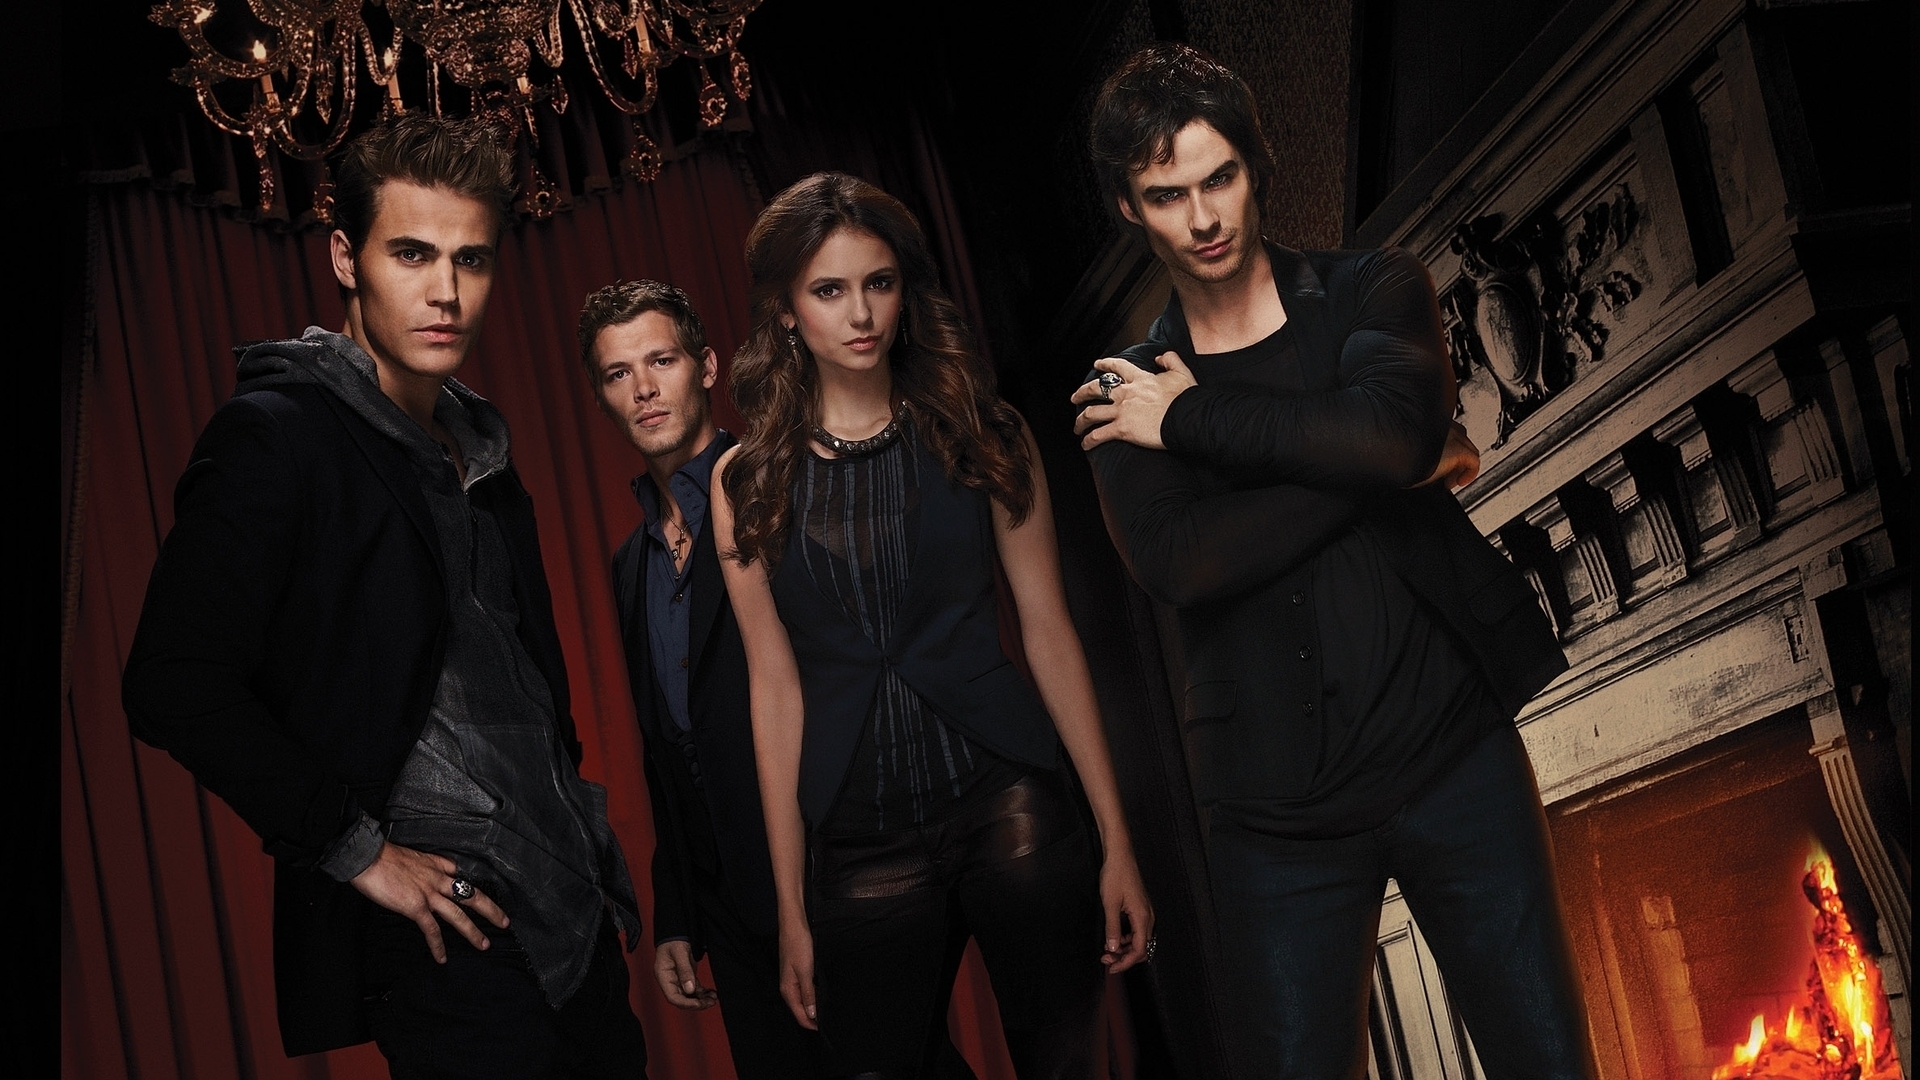 The Vampire Diaries Actors for 1920 x 1080 HDTV 1080p resolution